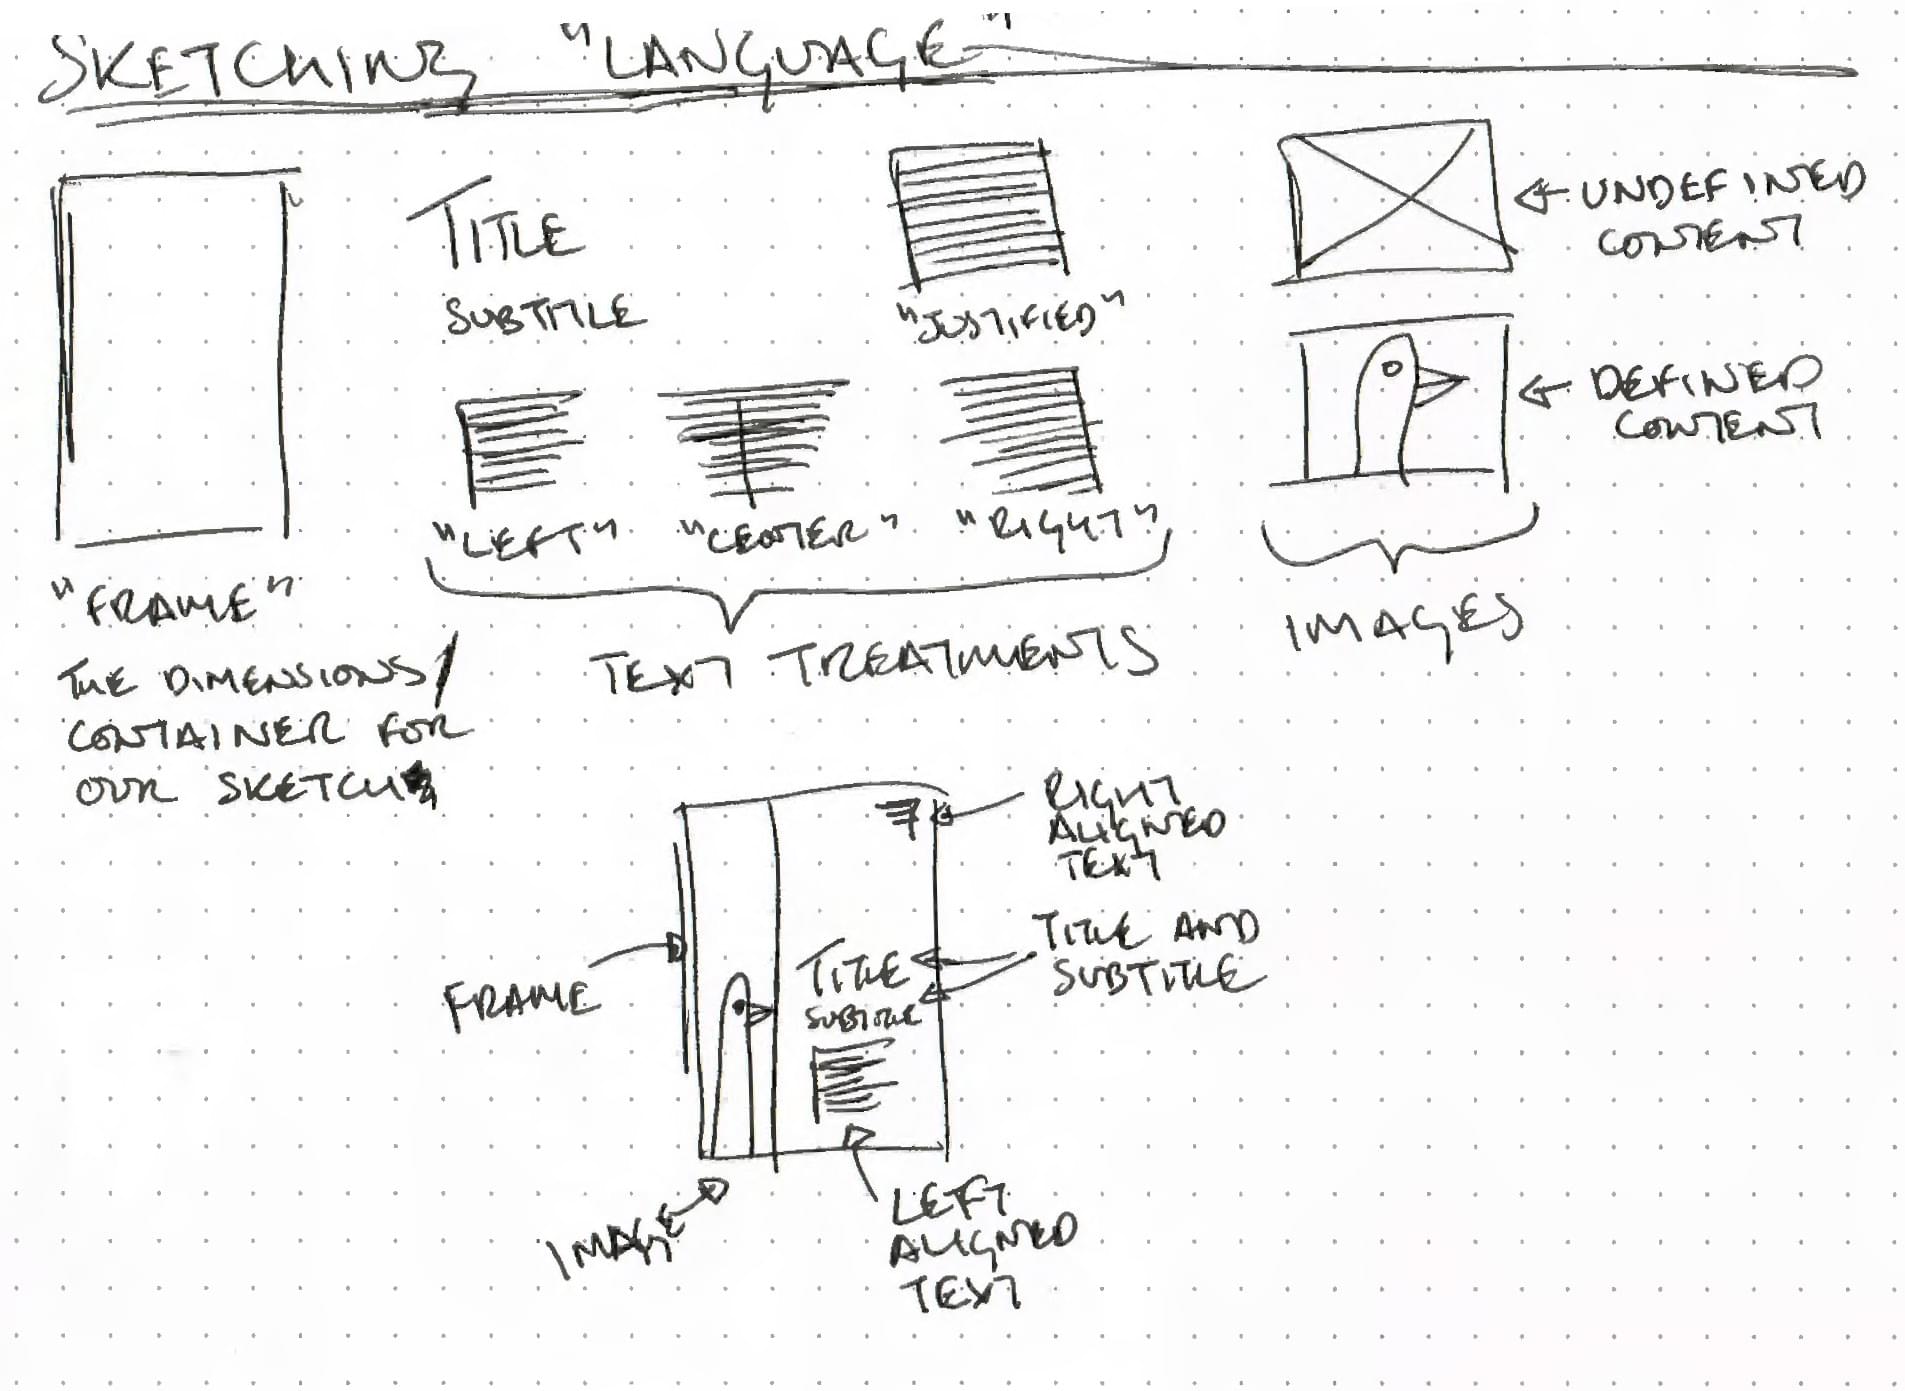 A sketch illustrating different components of a layout sketch including the frame, text alignment and titling, and images